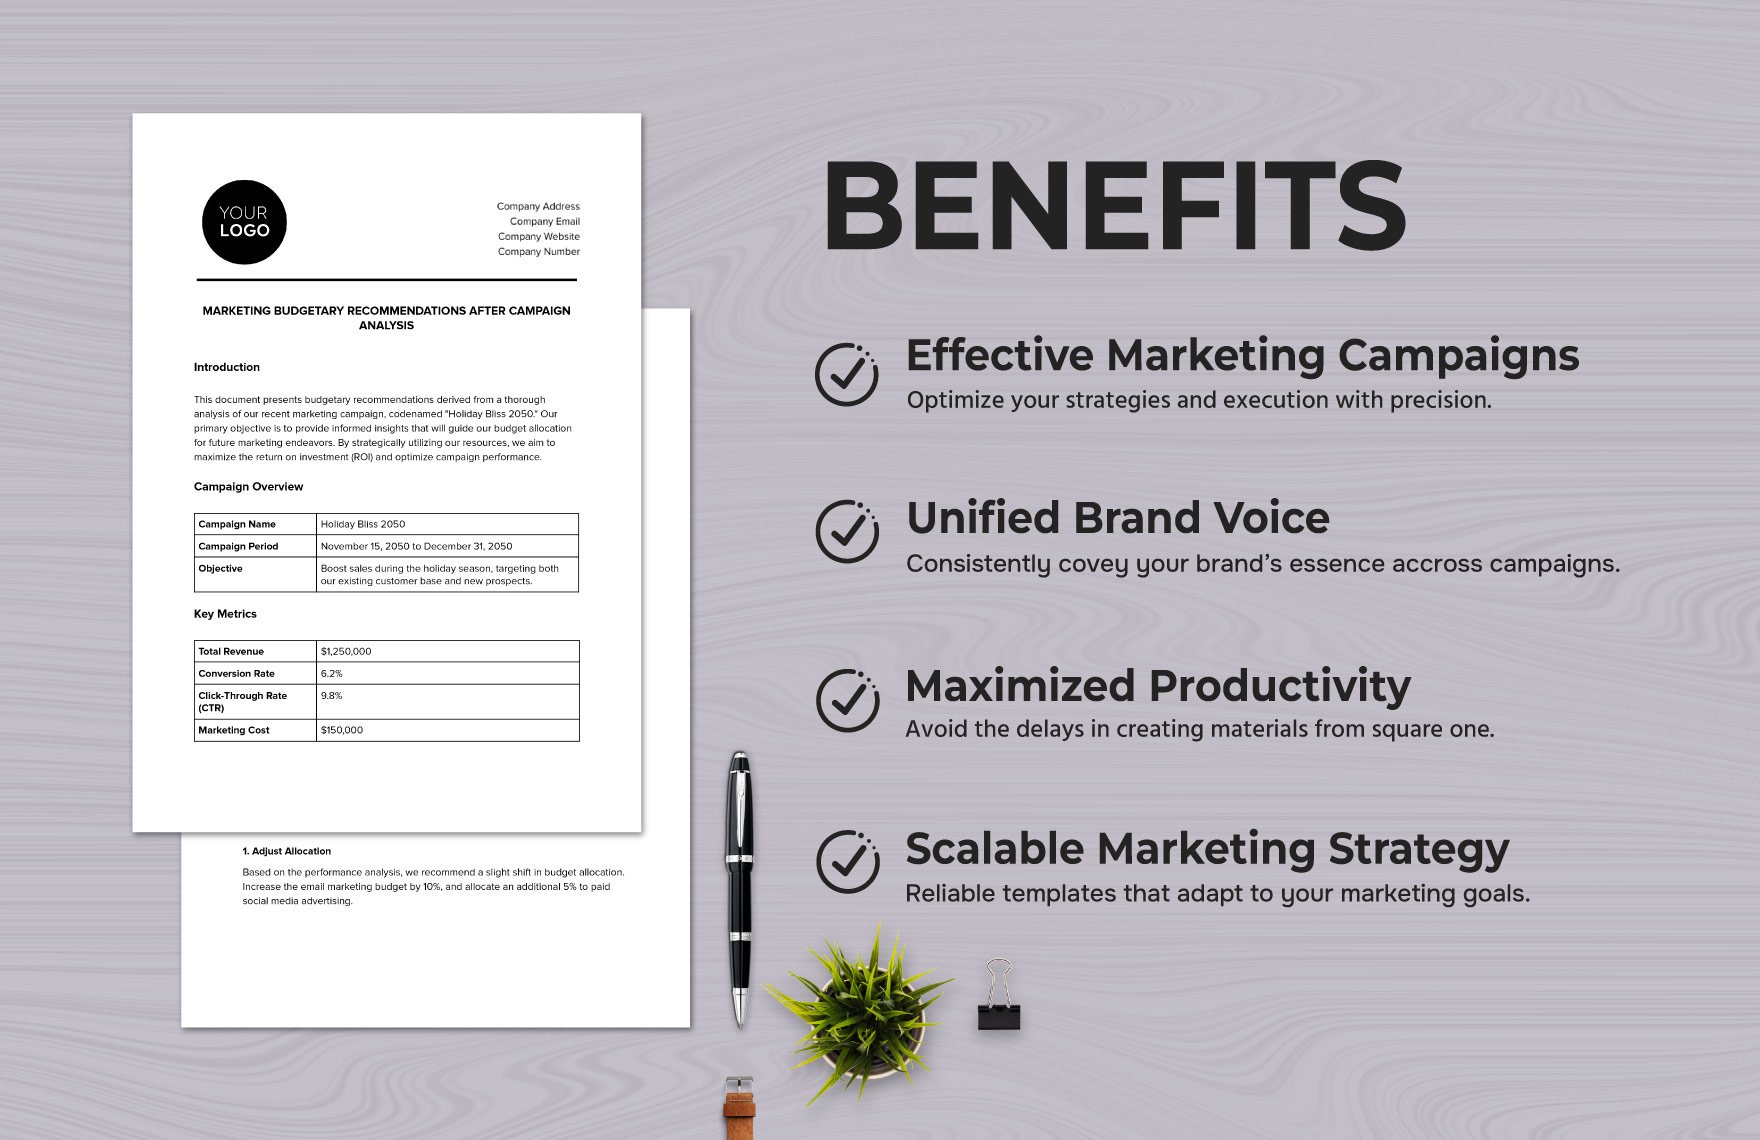 Marketing Budgetary Recommendations after Campaign Analysis Template